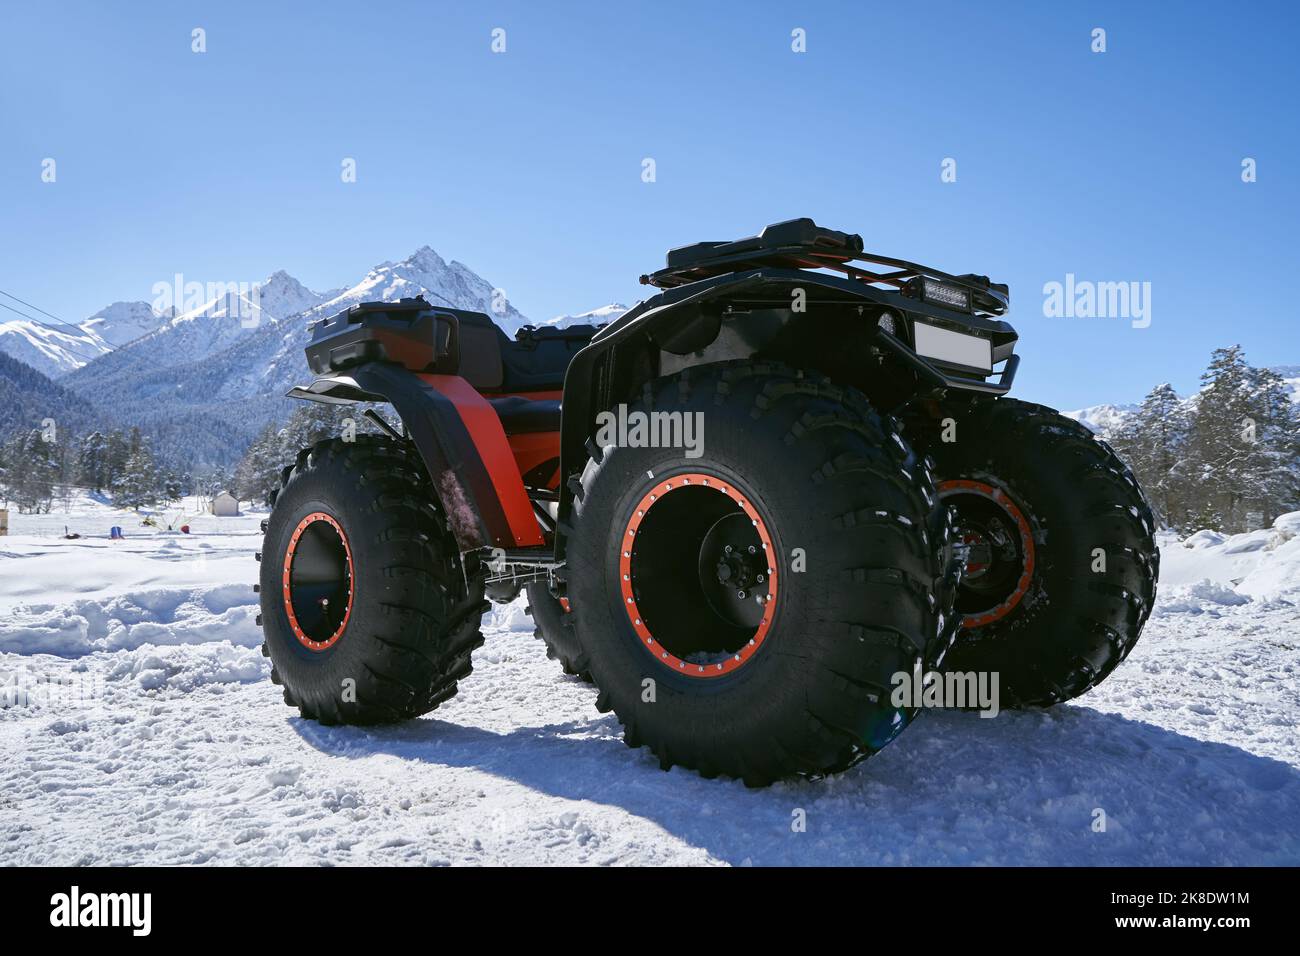 Quad bike with big wheels on the snow in mountains. Stock Photo